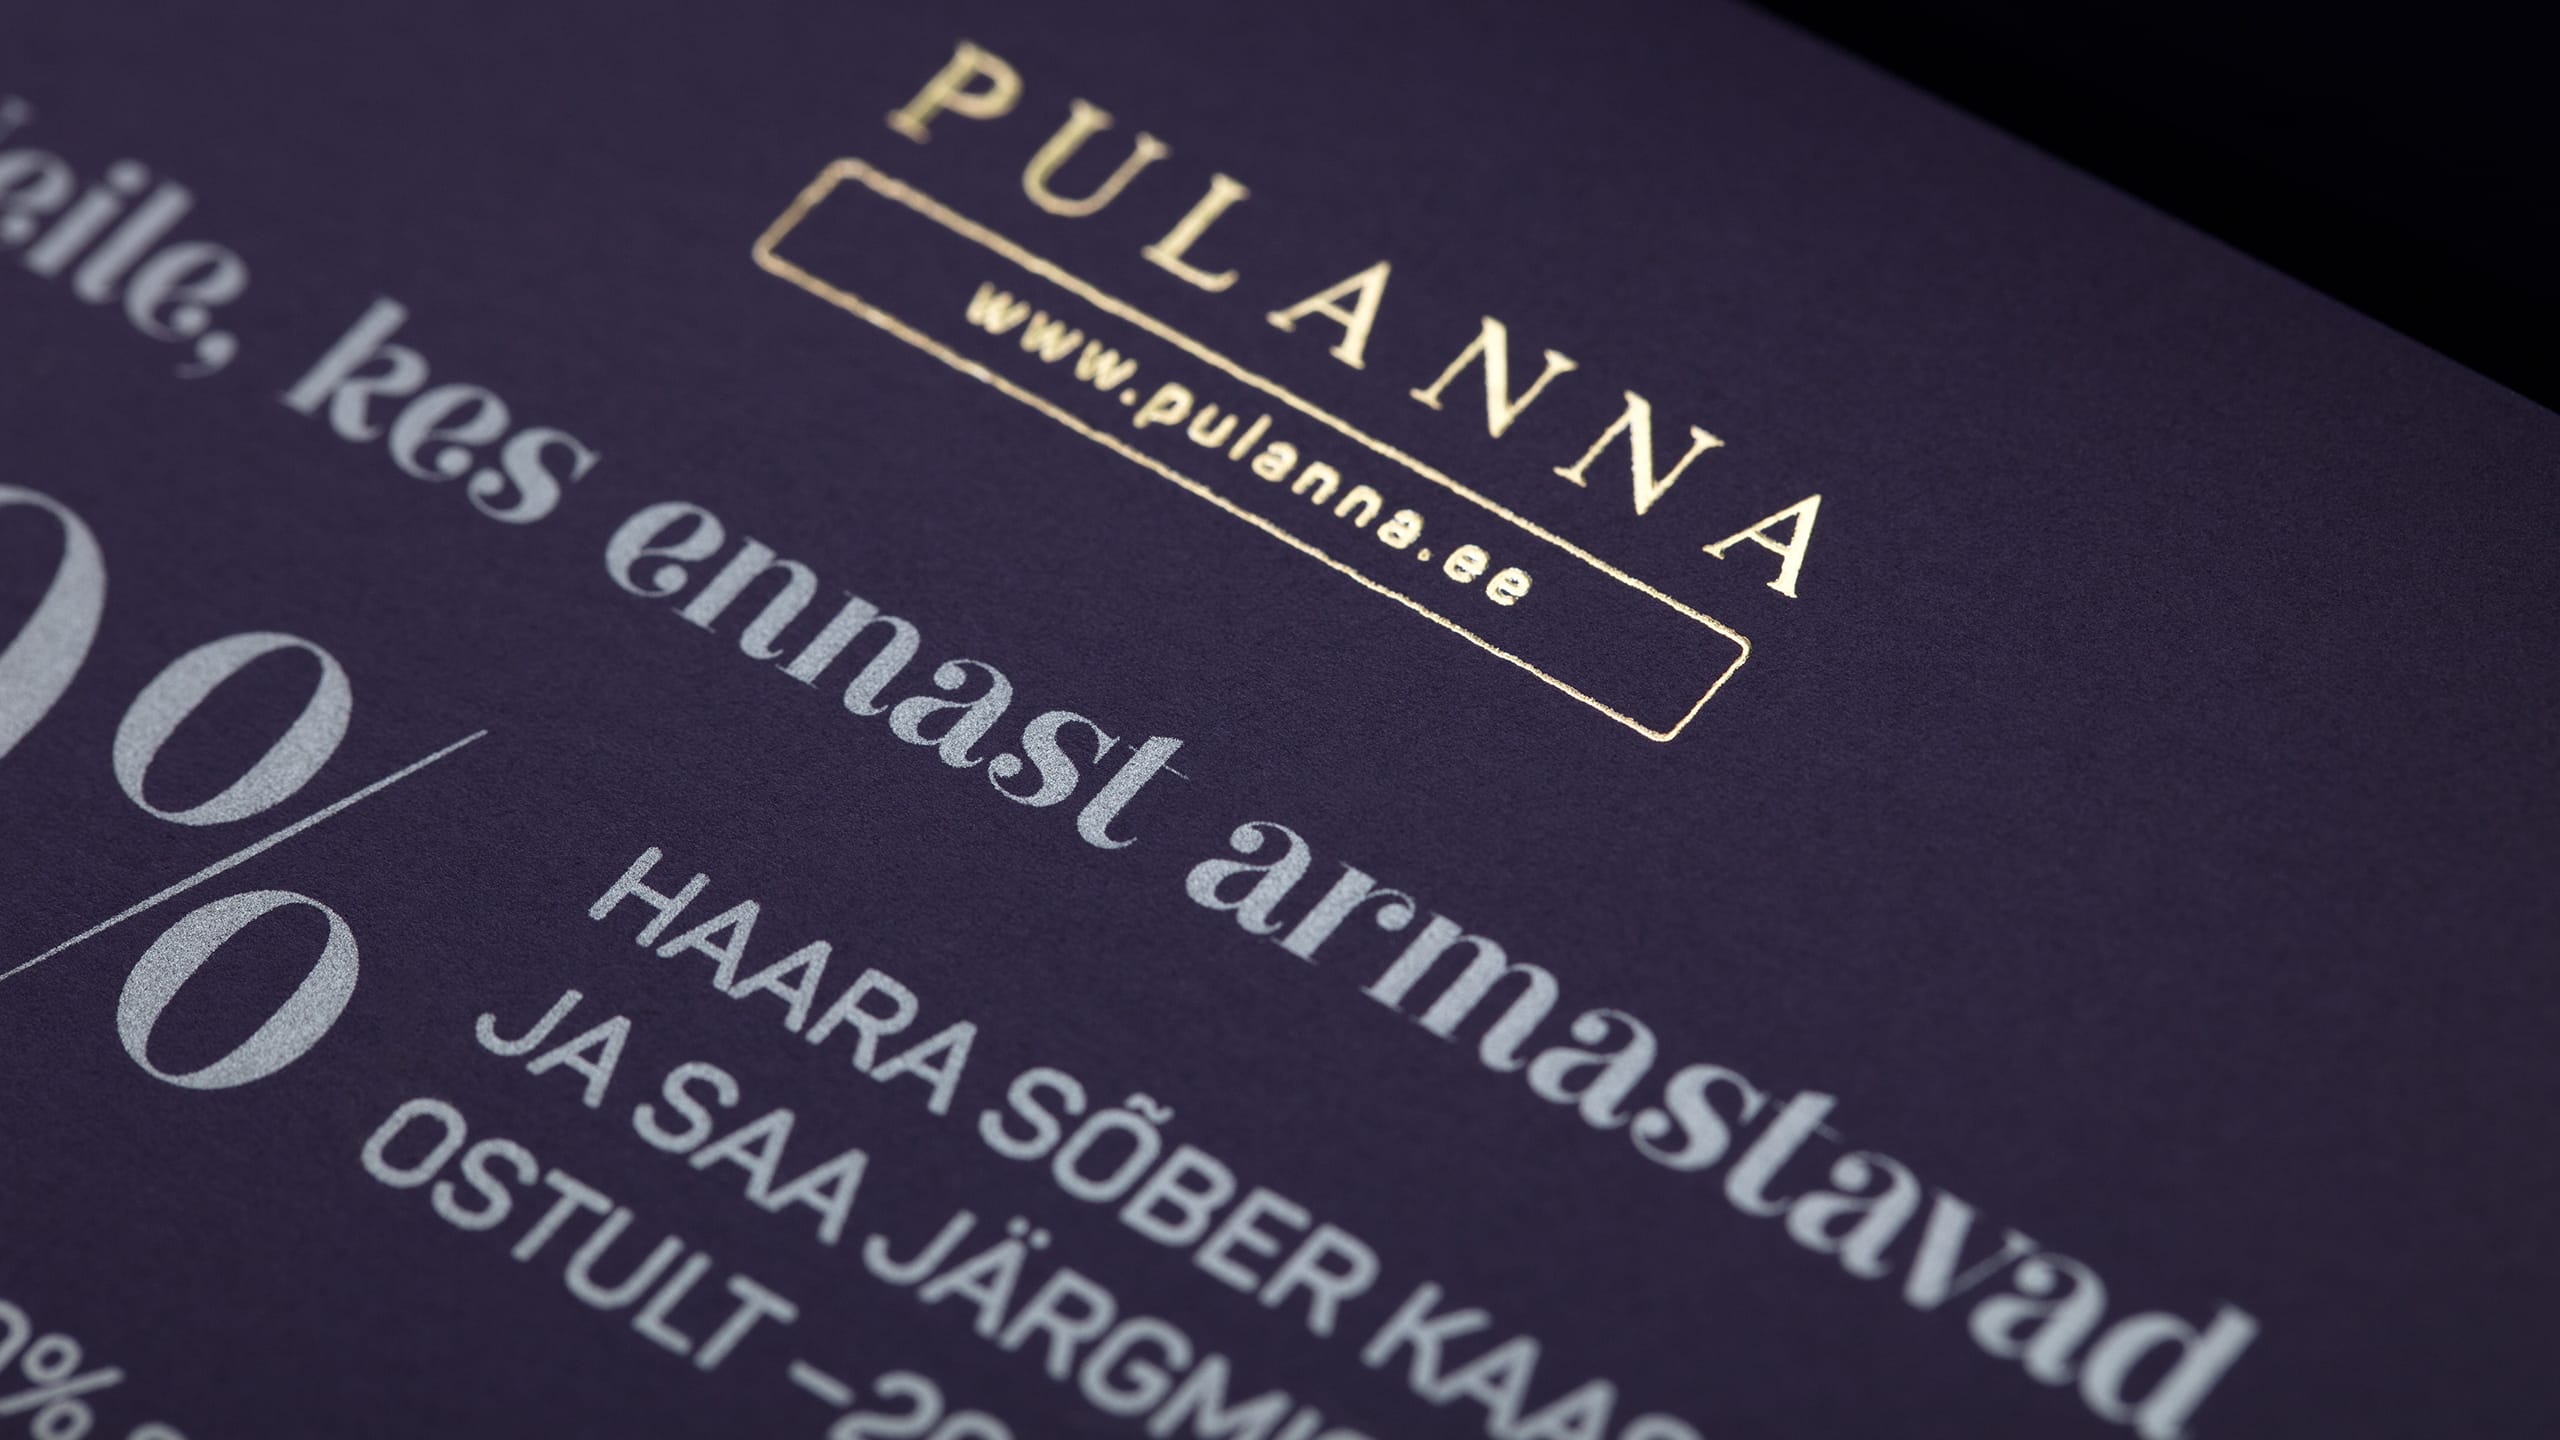 Print materials for the online shop Pulanna